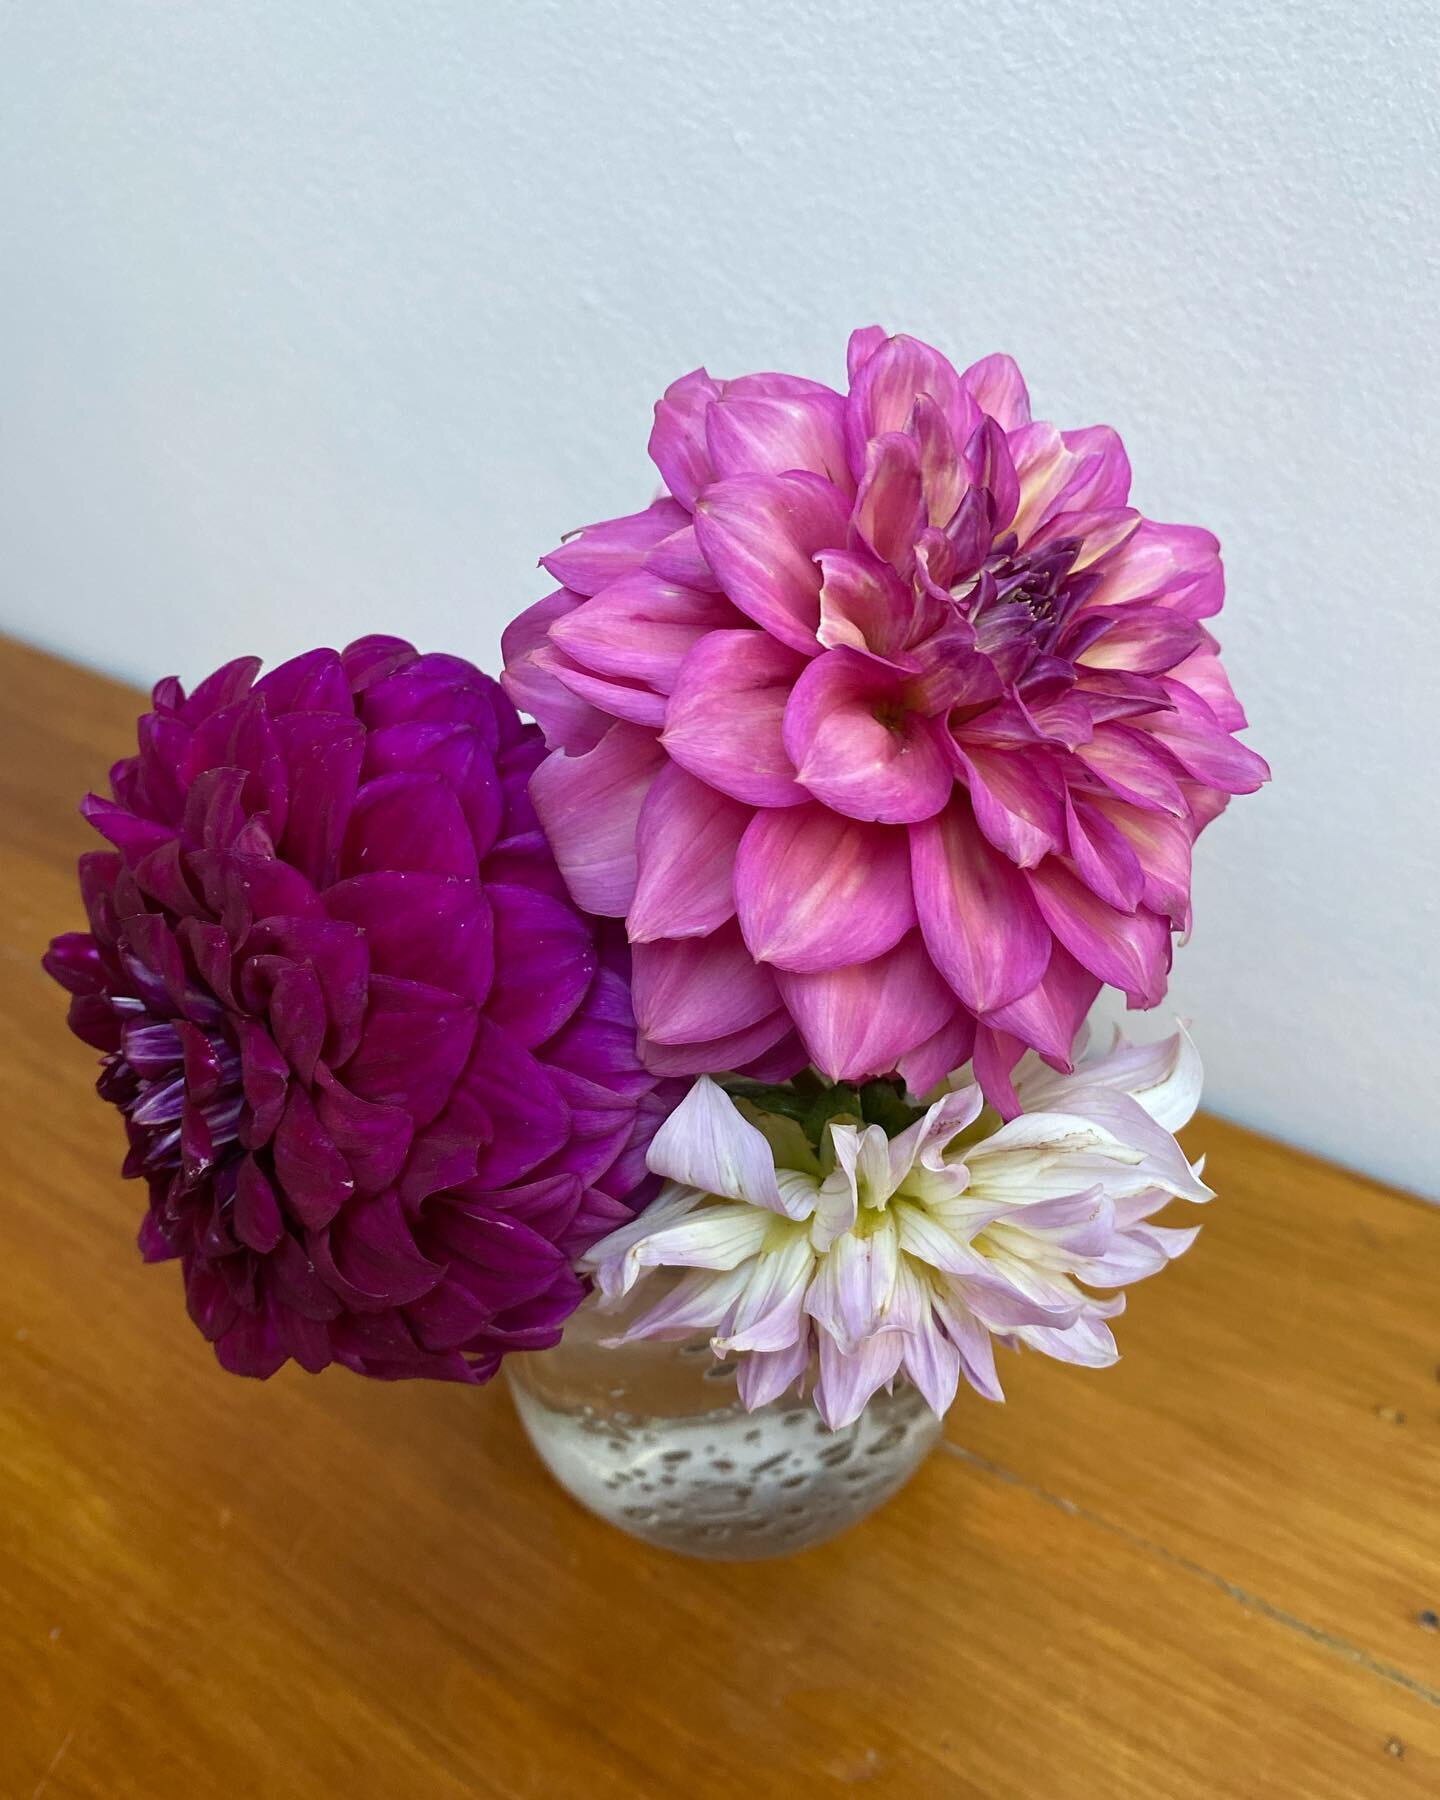 Dahlias from the Oldham House garden 😍